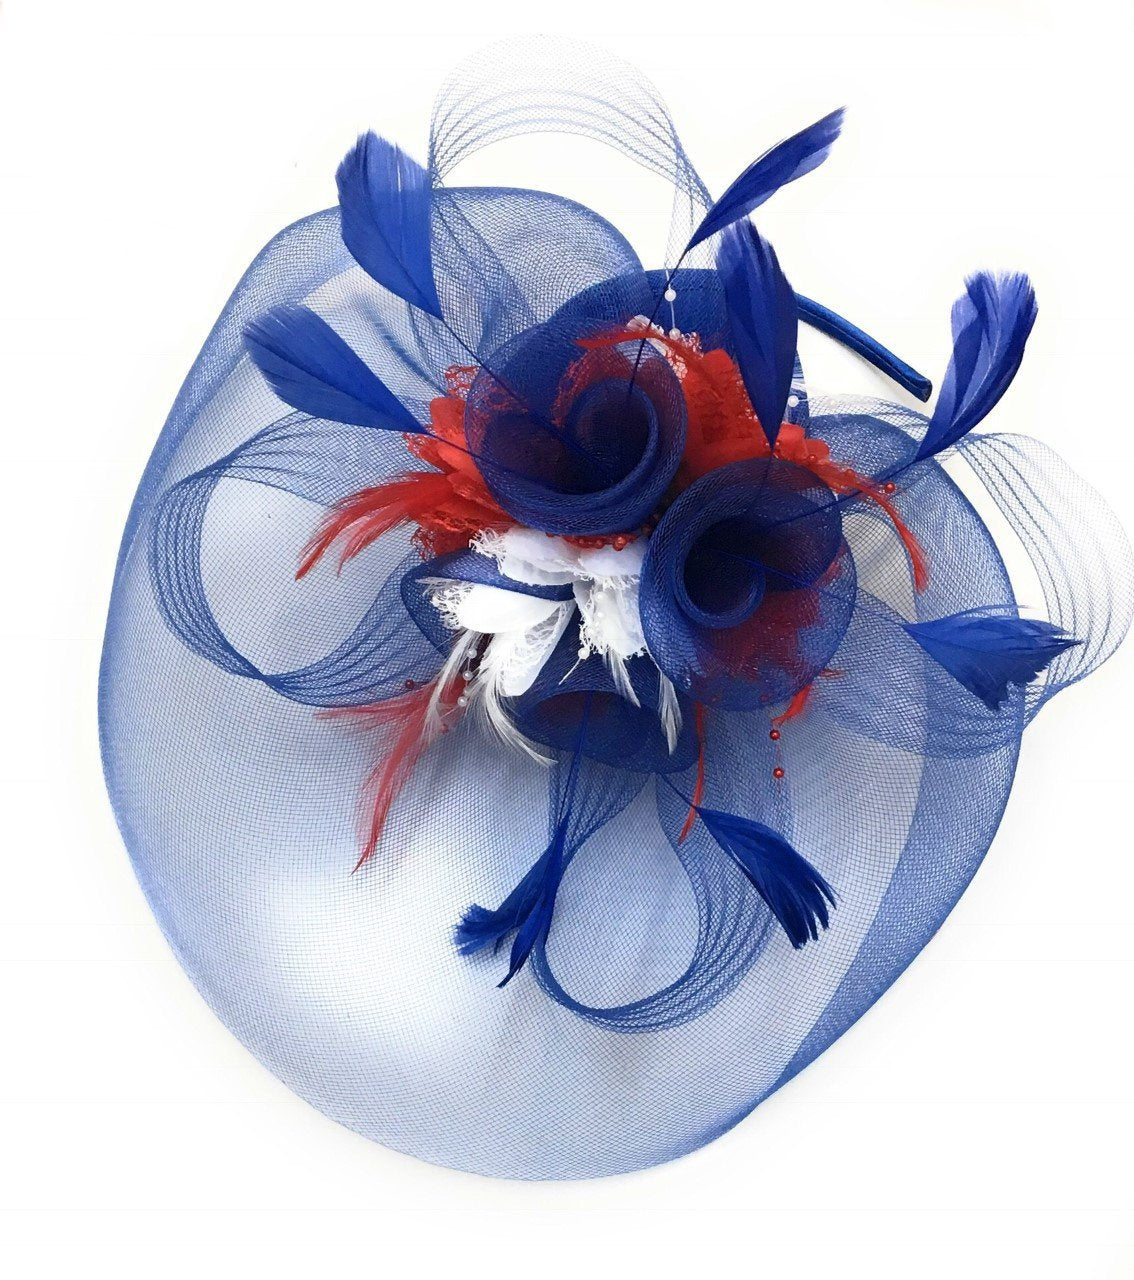 Caprilite Big Royal Blue, Red and White Union Jack Fascinator Hat Veil Net Ascot Derby Races Wedding Headband Alice Band Feather Flower